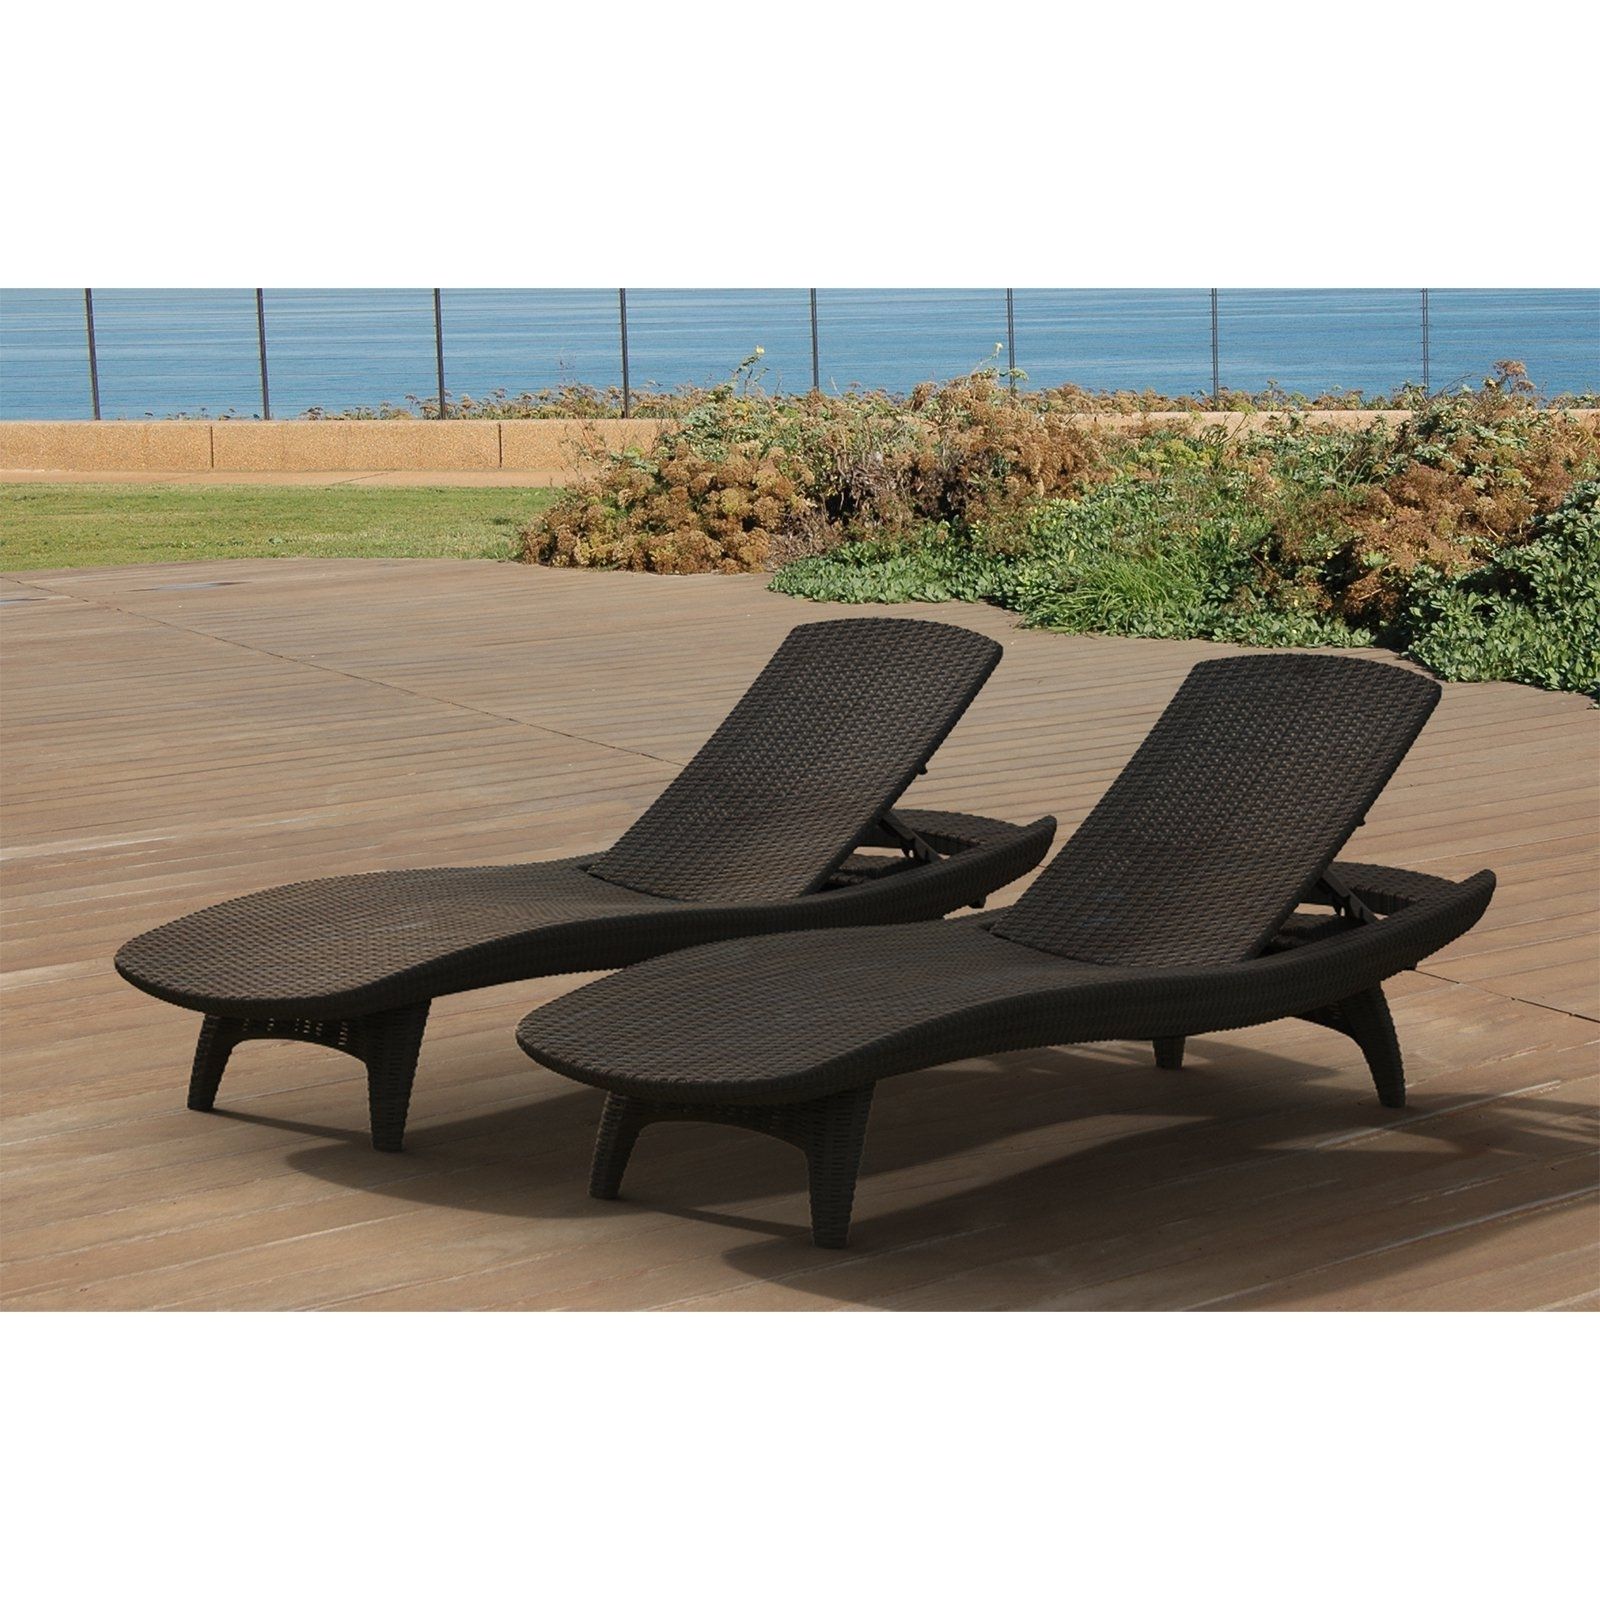 Featured Photo of 15 Collection of Hotel Pool Chaise Lounge Chairs